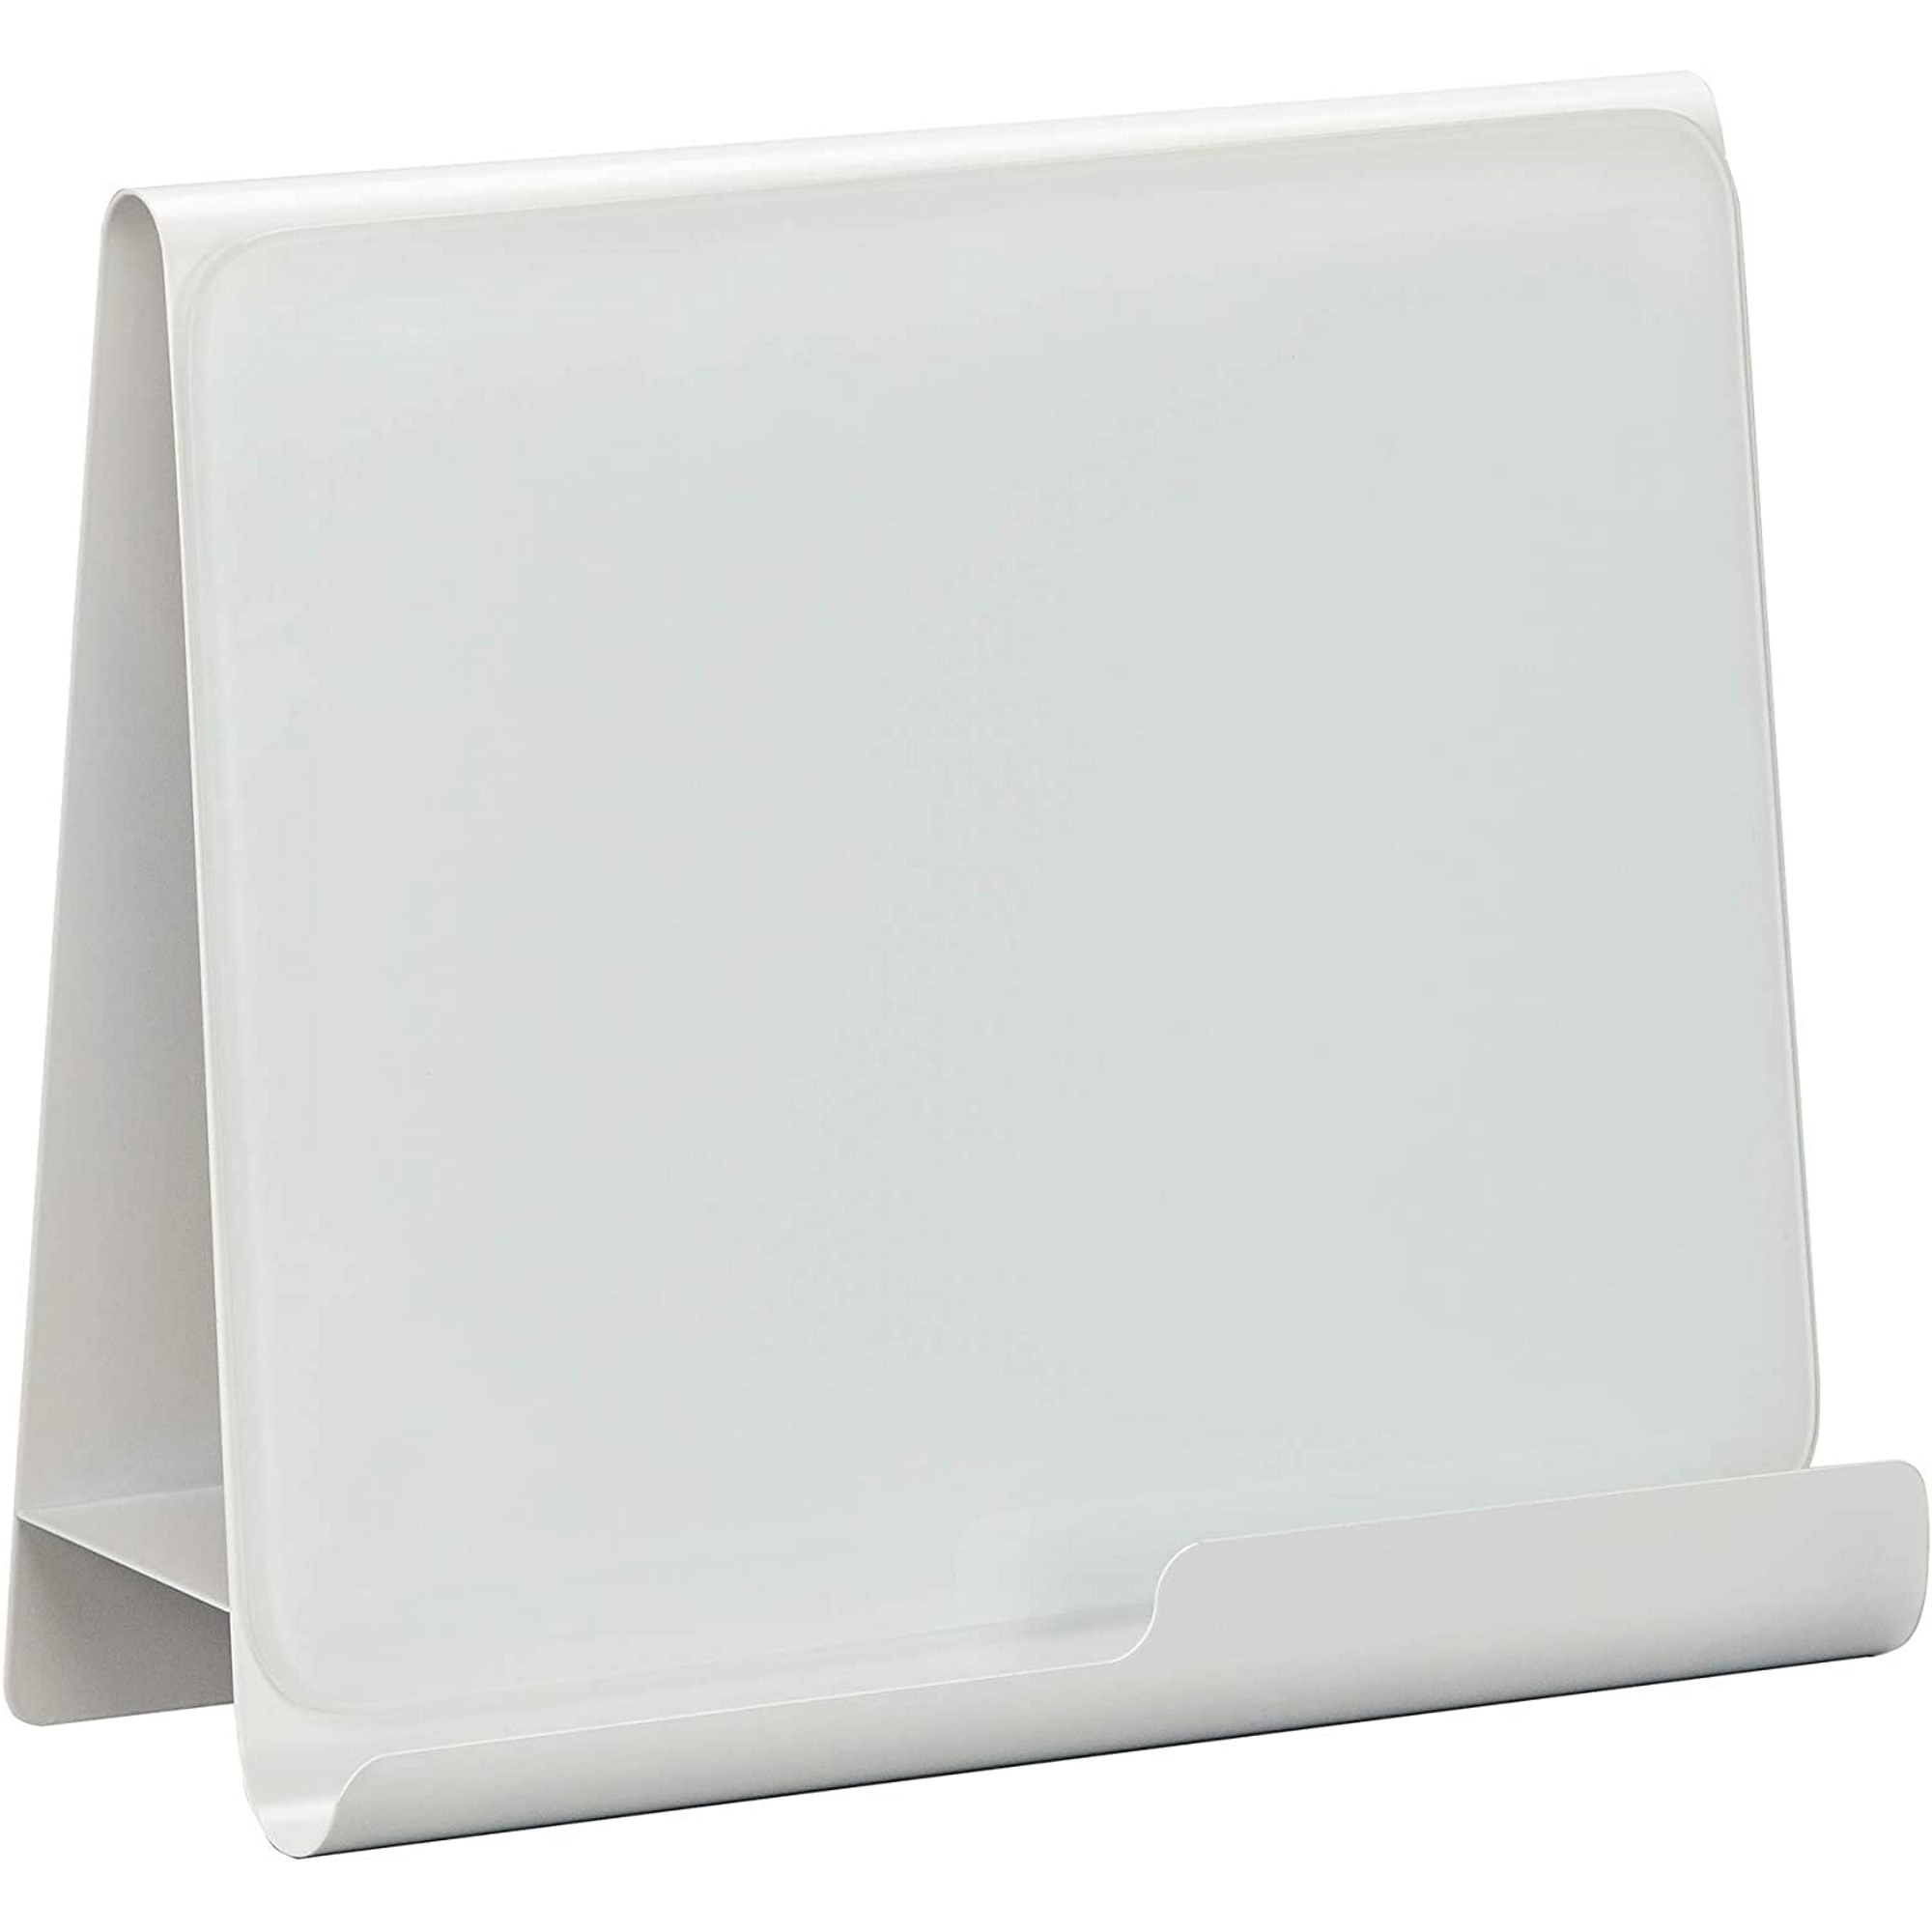  Safco Wave Desk Accessory, Desktop Whiteboard &amp; Magnetic Document Stand - (2 Colors Available)